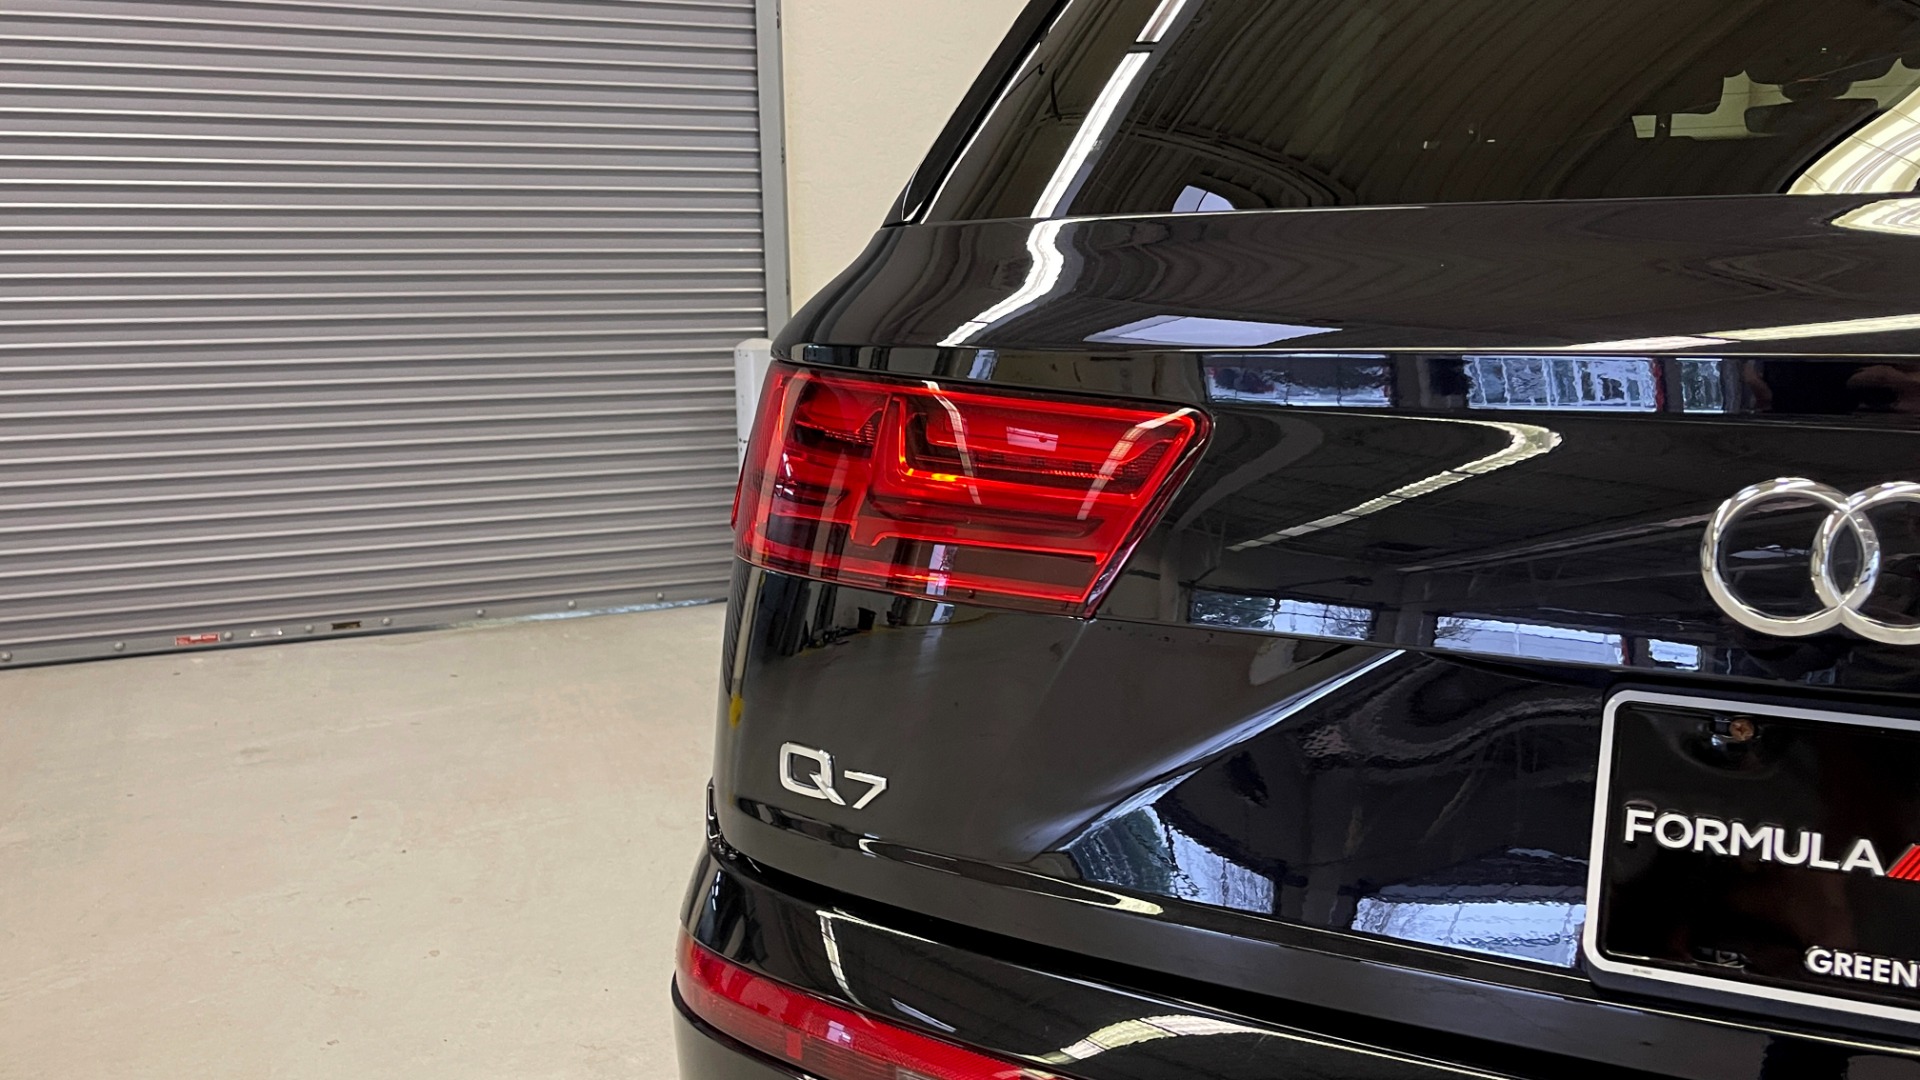 Used 2019 Audi Q7 PREMIUM PLUS / NAV / SUNROOF / DRVR ASST / COLD WTHR / 20IN WHLS / REARVIEW for sale Sold at Formula Imports in Charlotte NC 28227 14